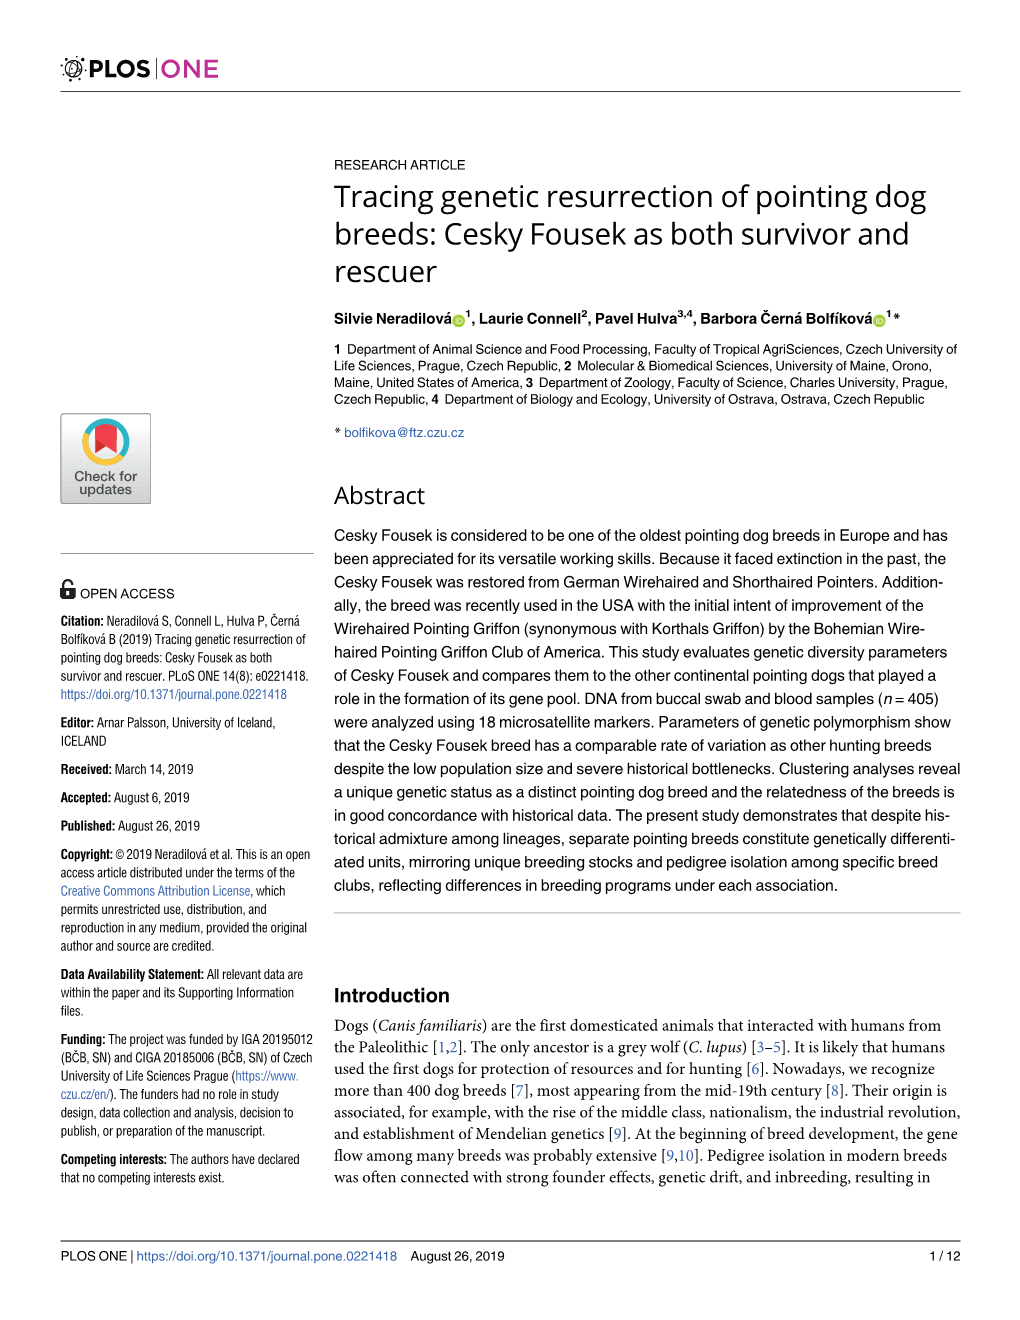 Tracing Genetic Resurrection of Pointing Dog Breeds: Cesky Fousek As Both Survivor and Rescuer